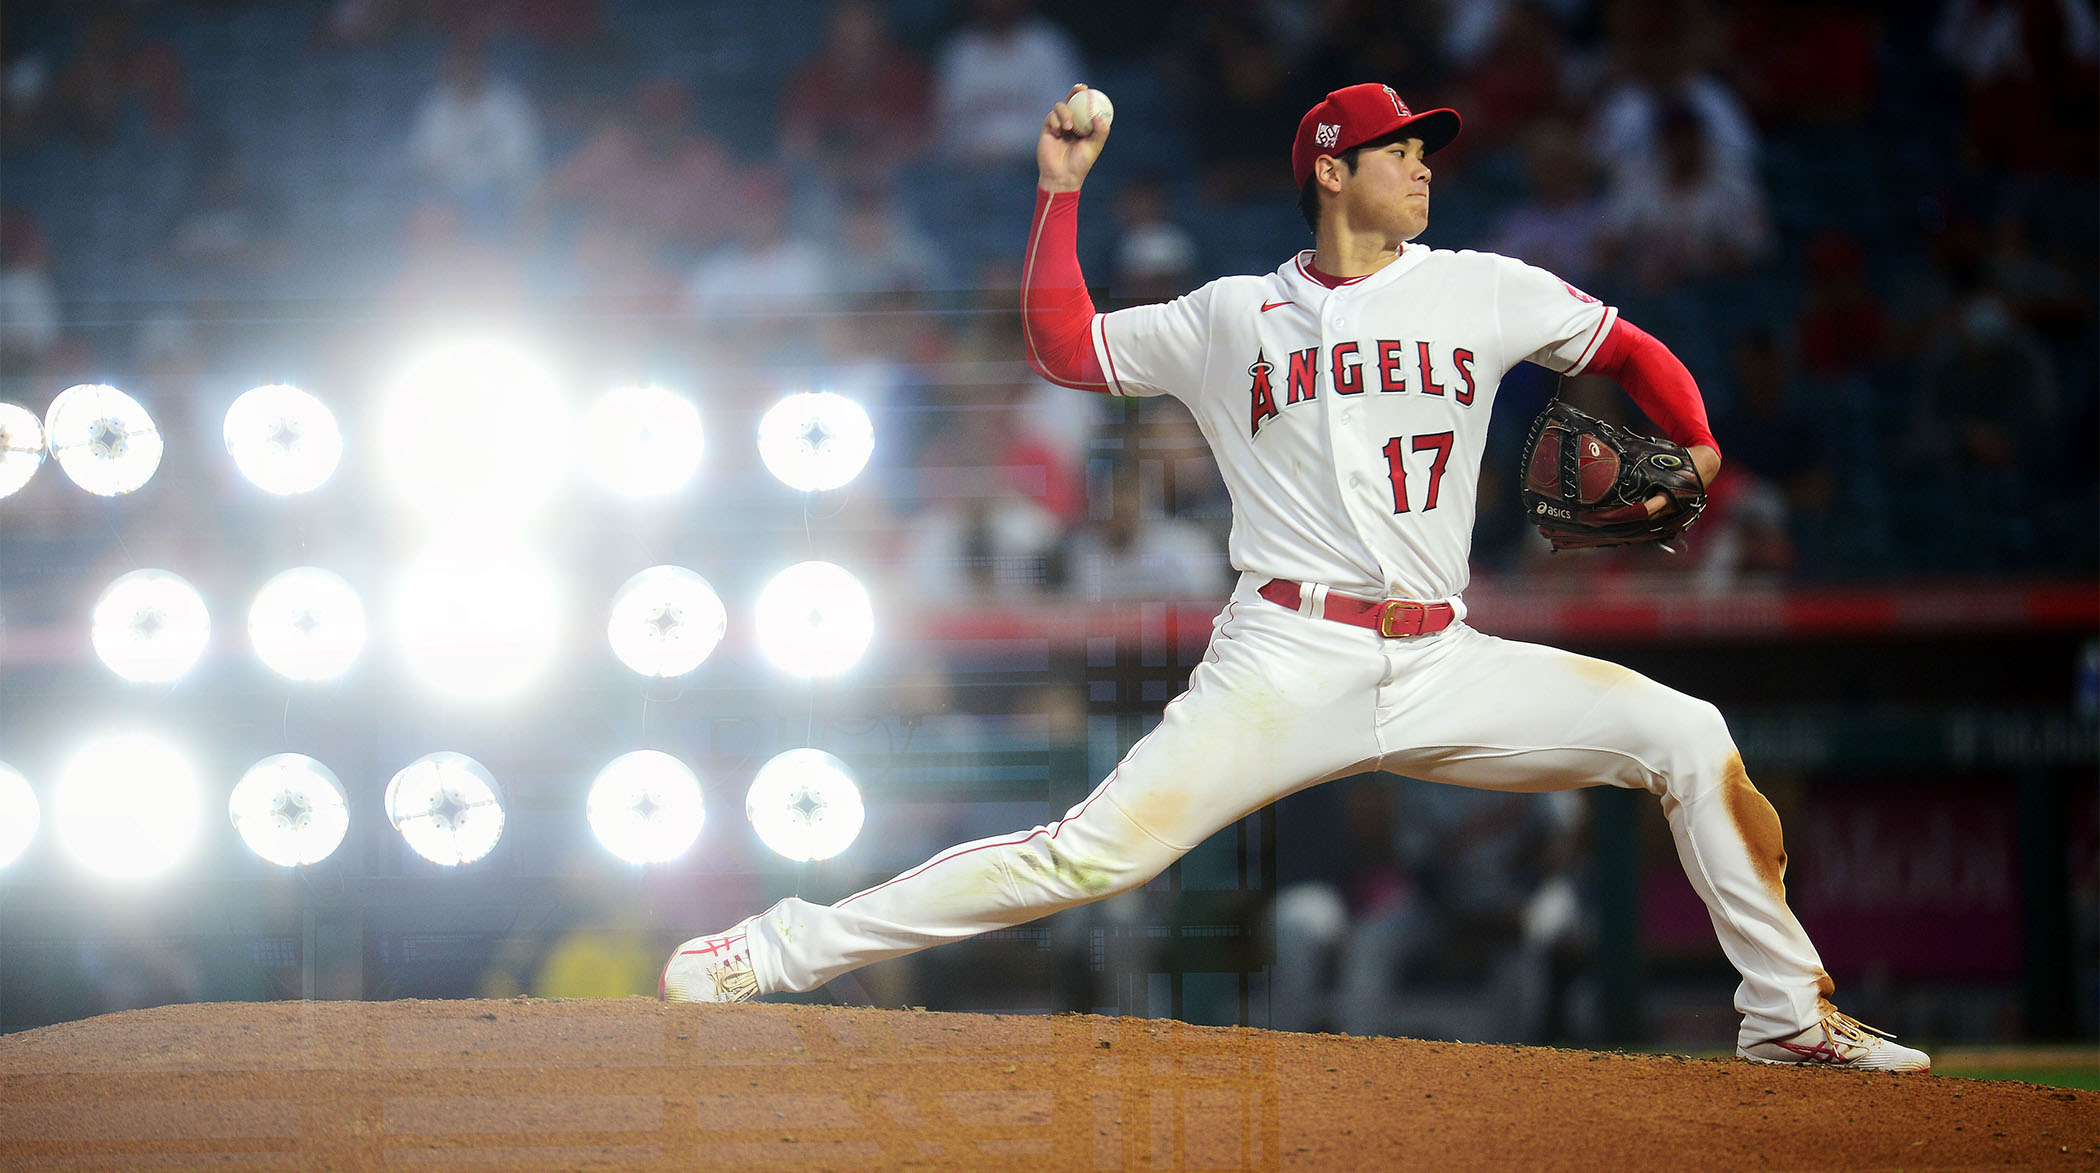 Angels Two Way Star Shohei Ohtani To Compete In 2021 Home Run Derby